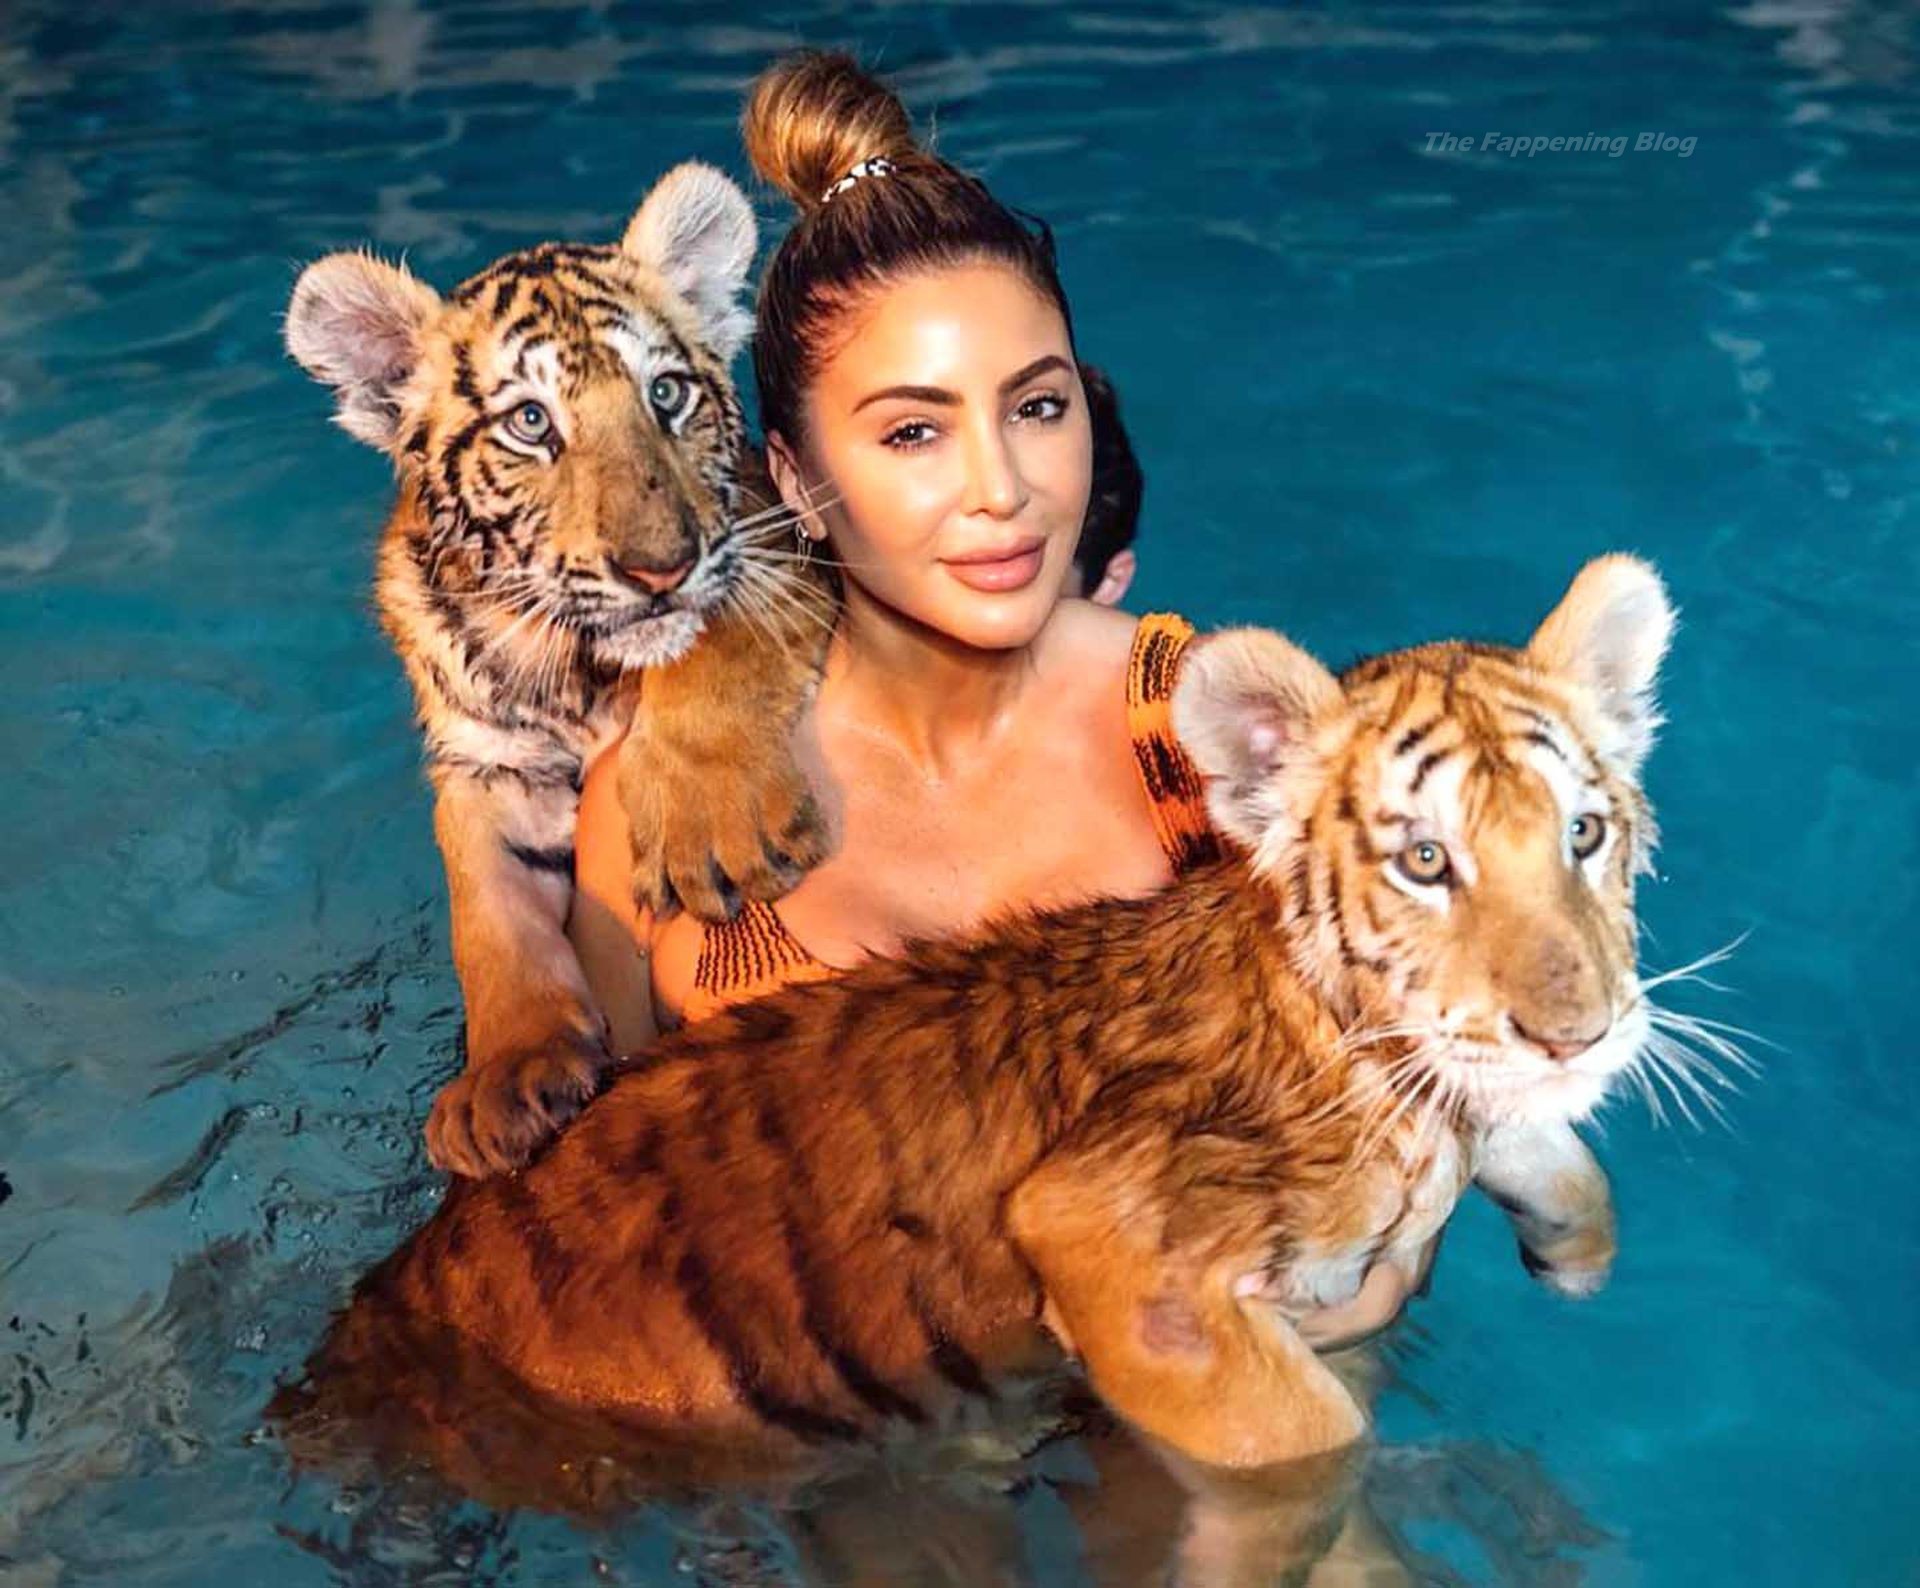 Larsa Pippen Gets Into a Swimming Pool with a Giant Tiger (2 Photos)